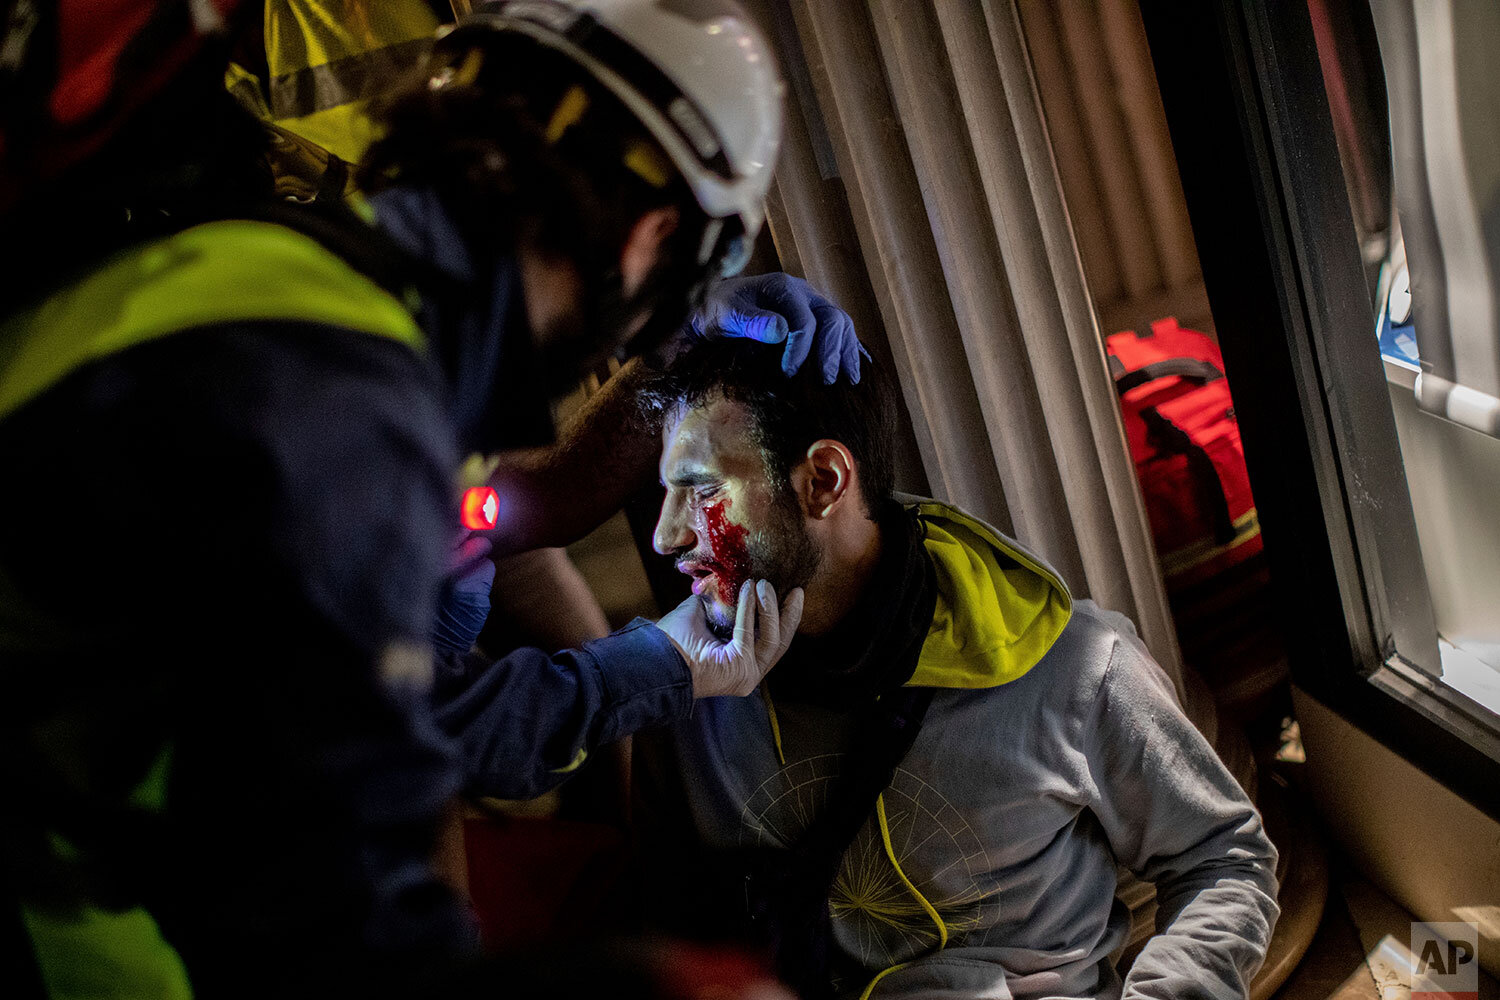  Paramedics attend a protestor during clashes with police in Barcelona, Spain, early Friday, Oct. 18, 2019. Catalonia's separatist leader vowed Thursday to hold a new vote to secede from Spain in less than two years as the embattled northeastern regi